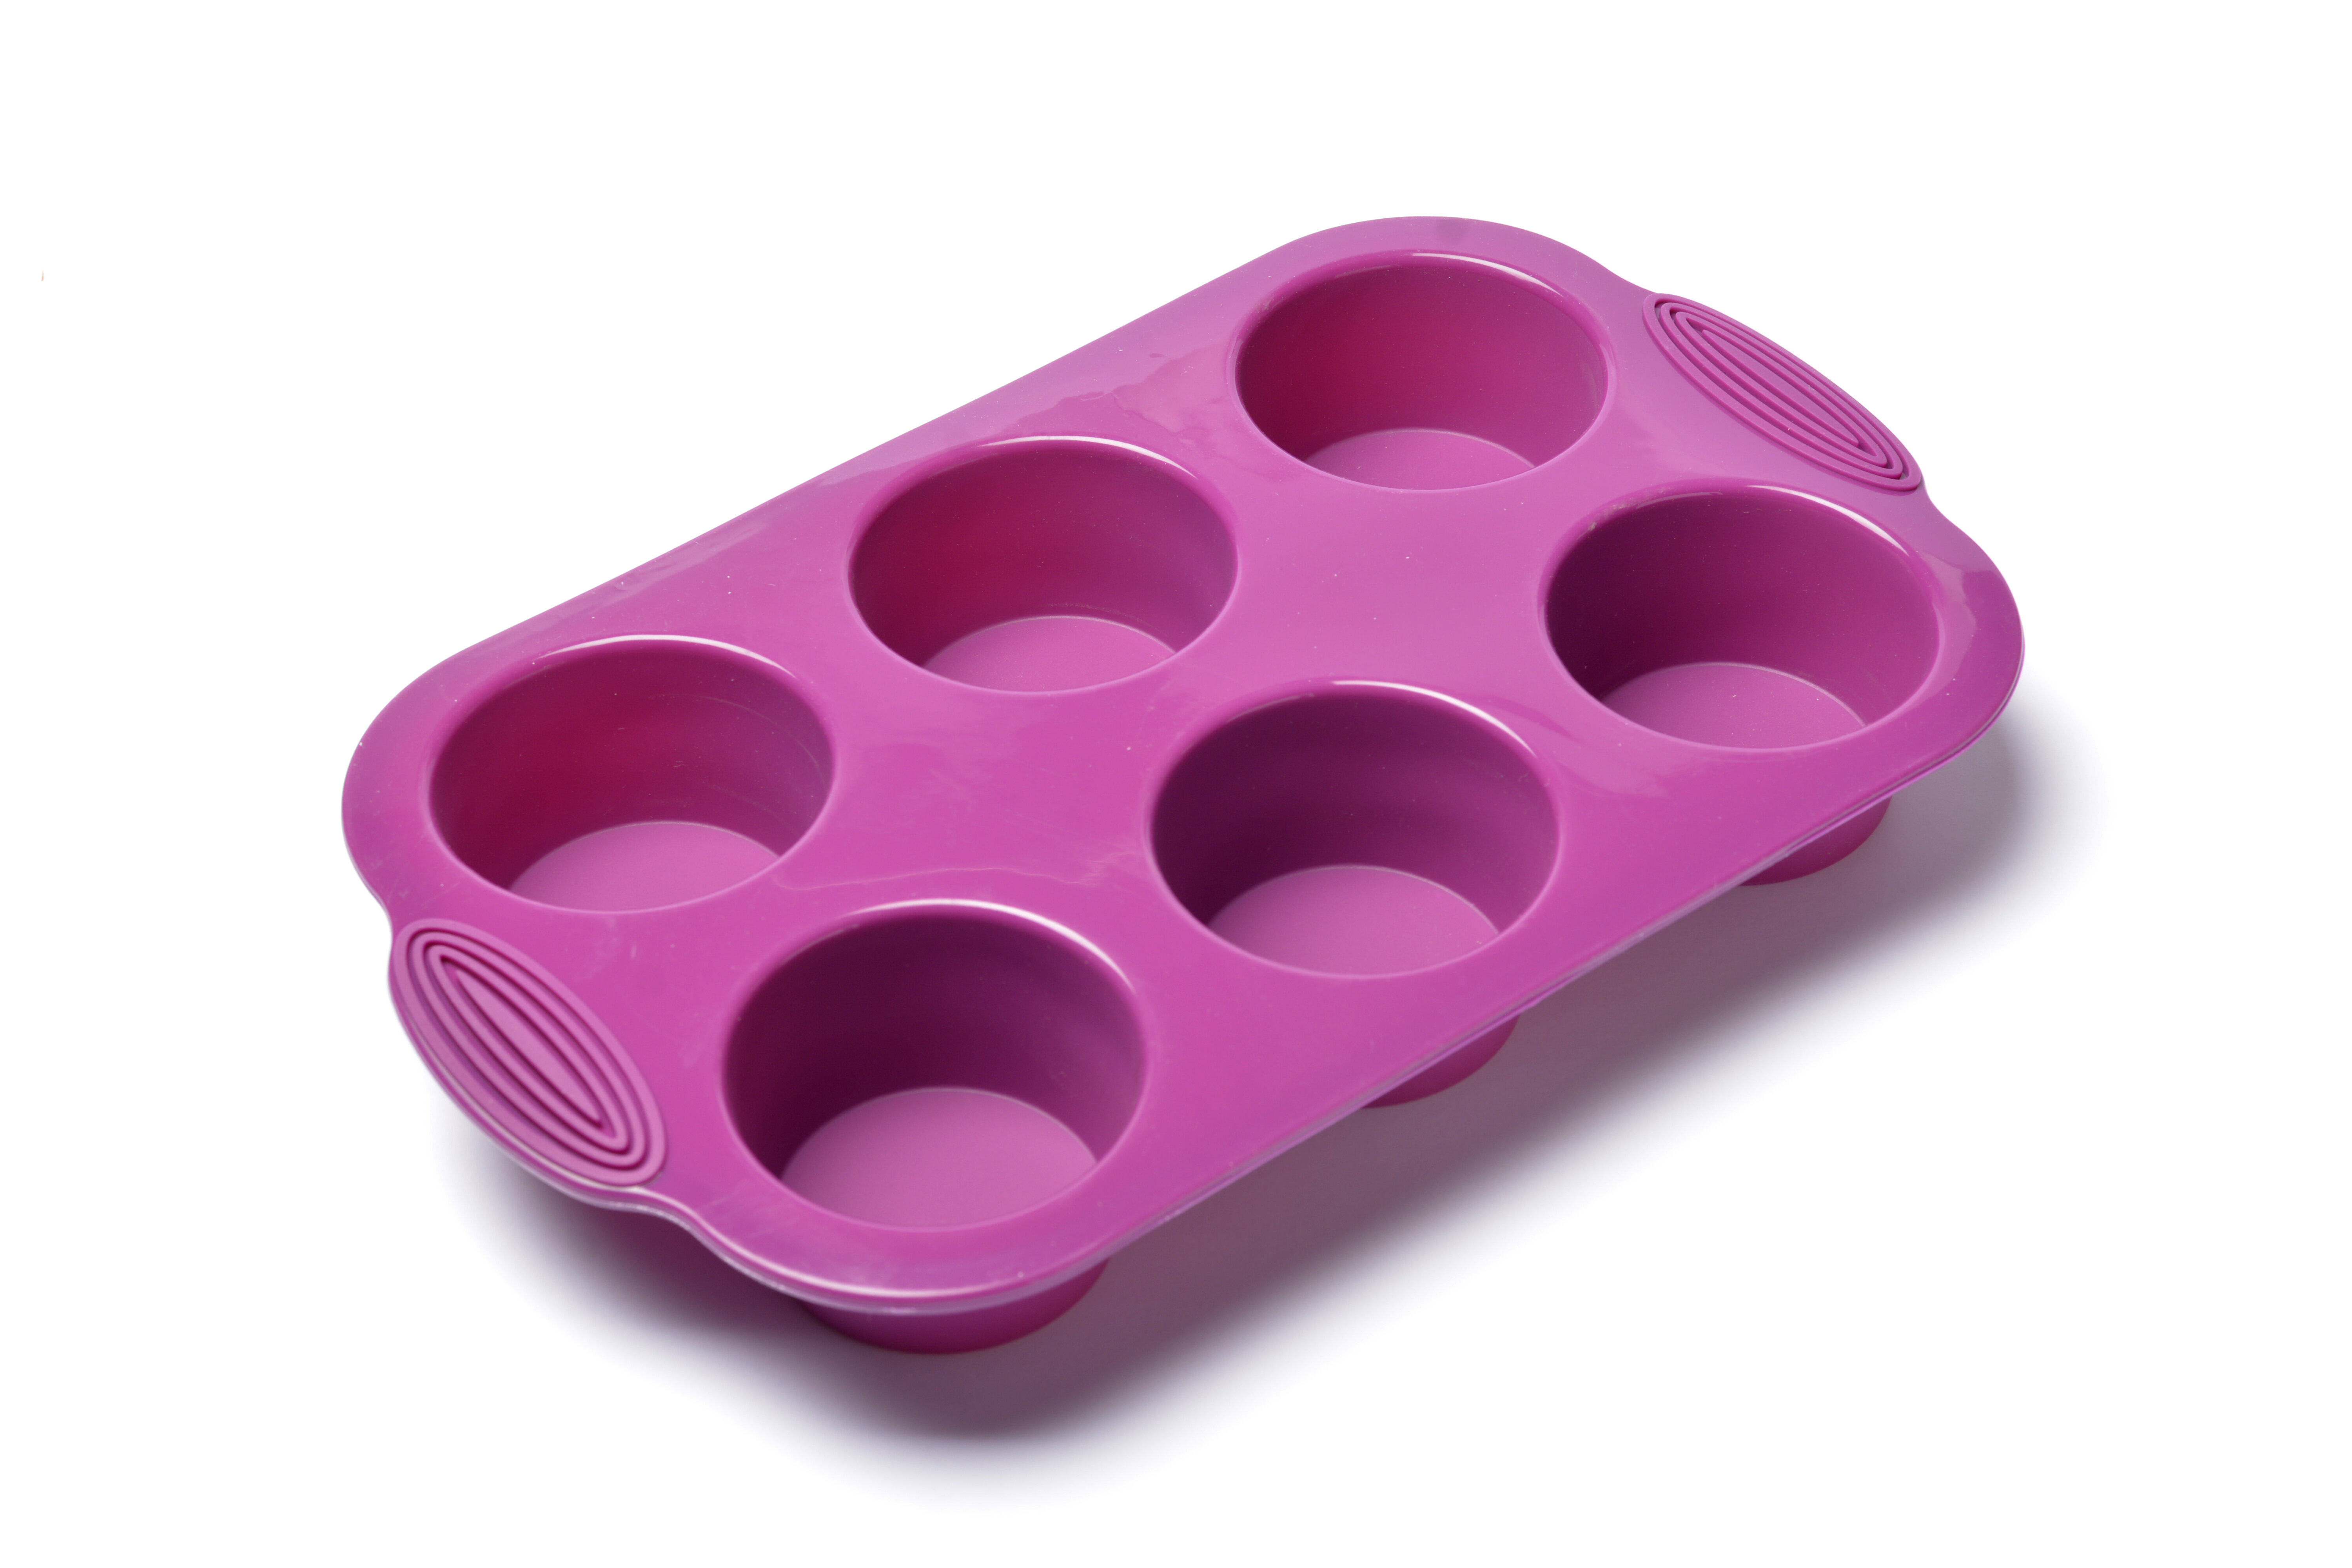 Muffin Pan 6 Cup Silicone